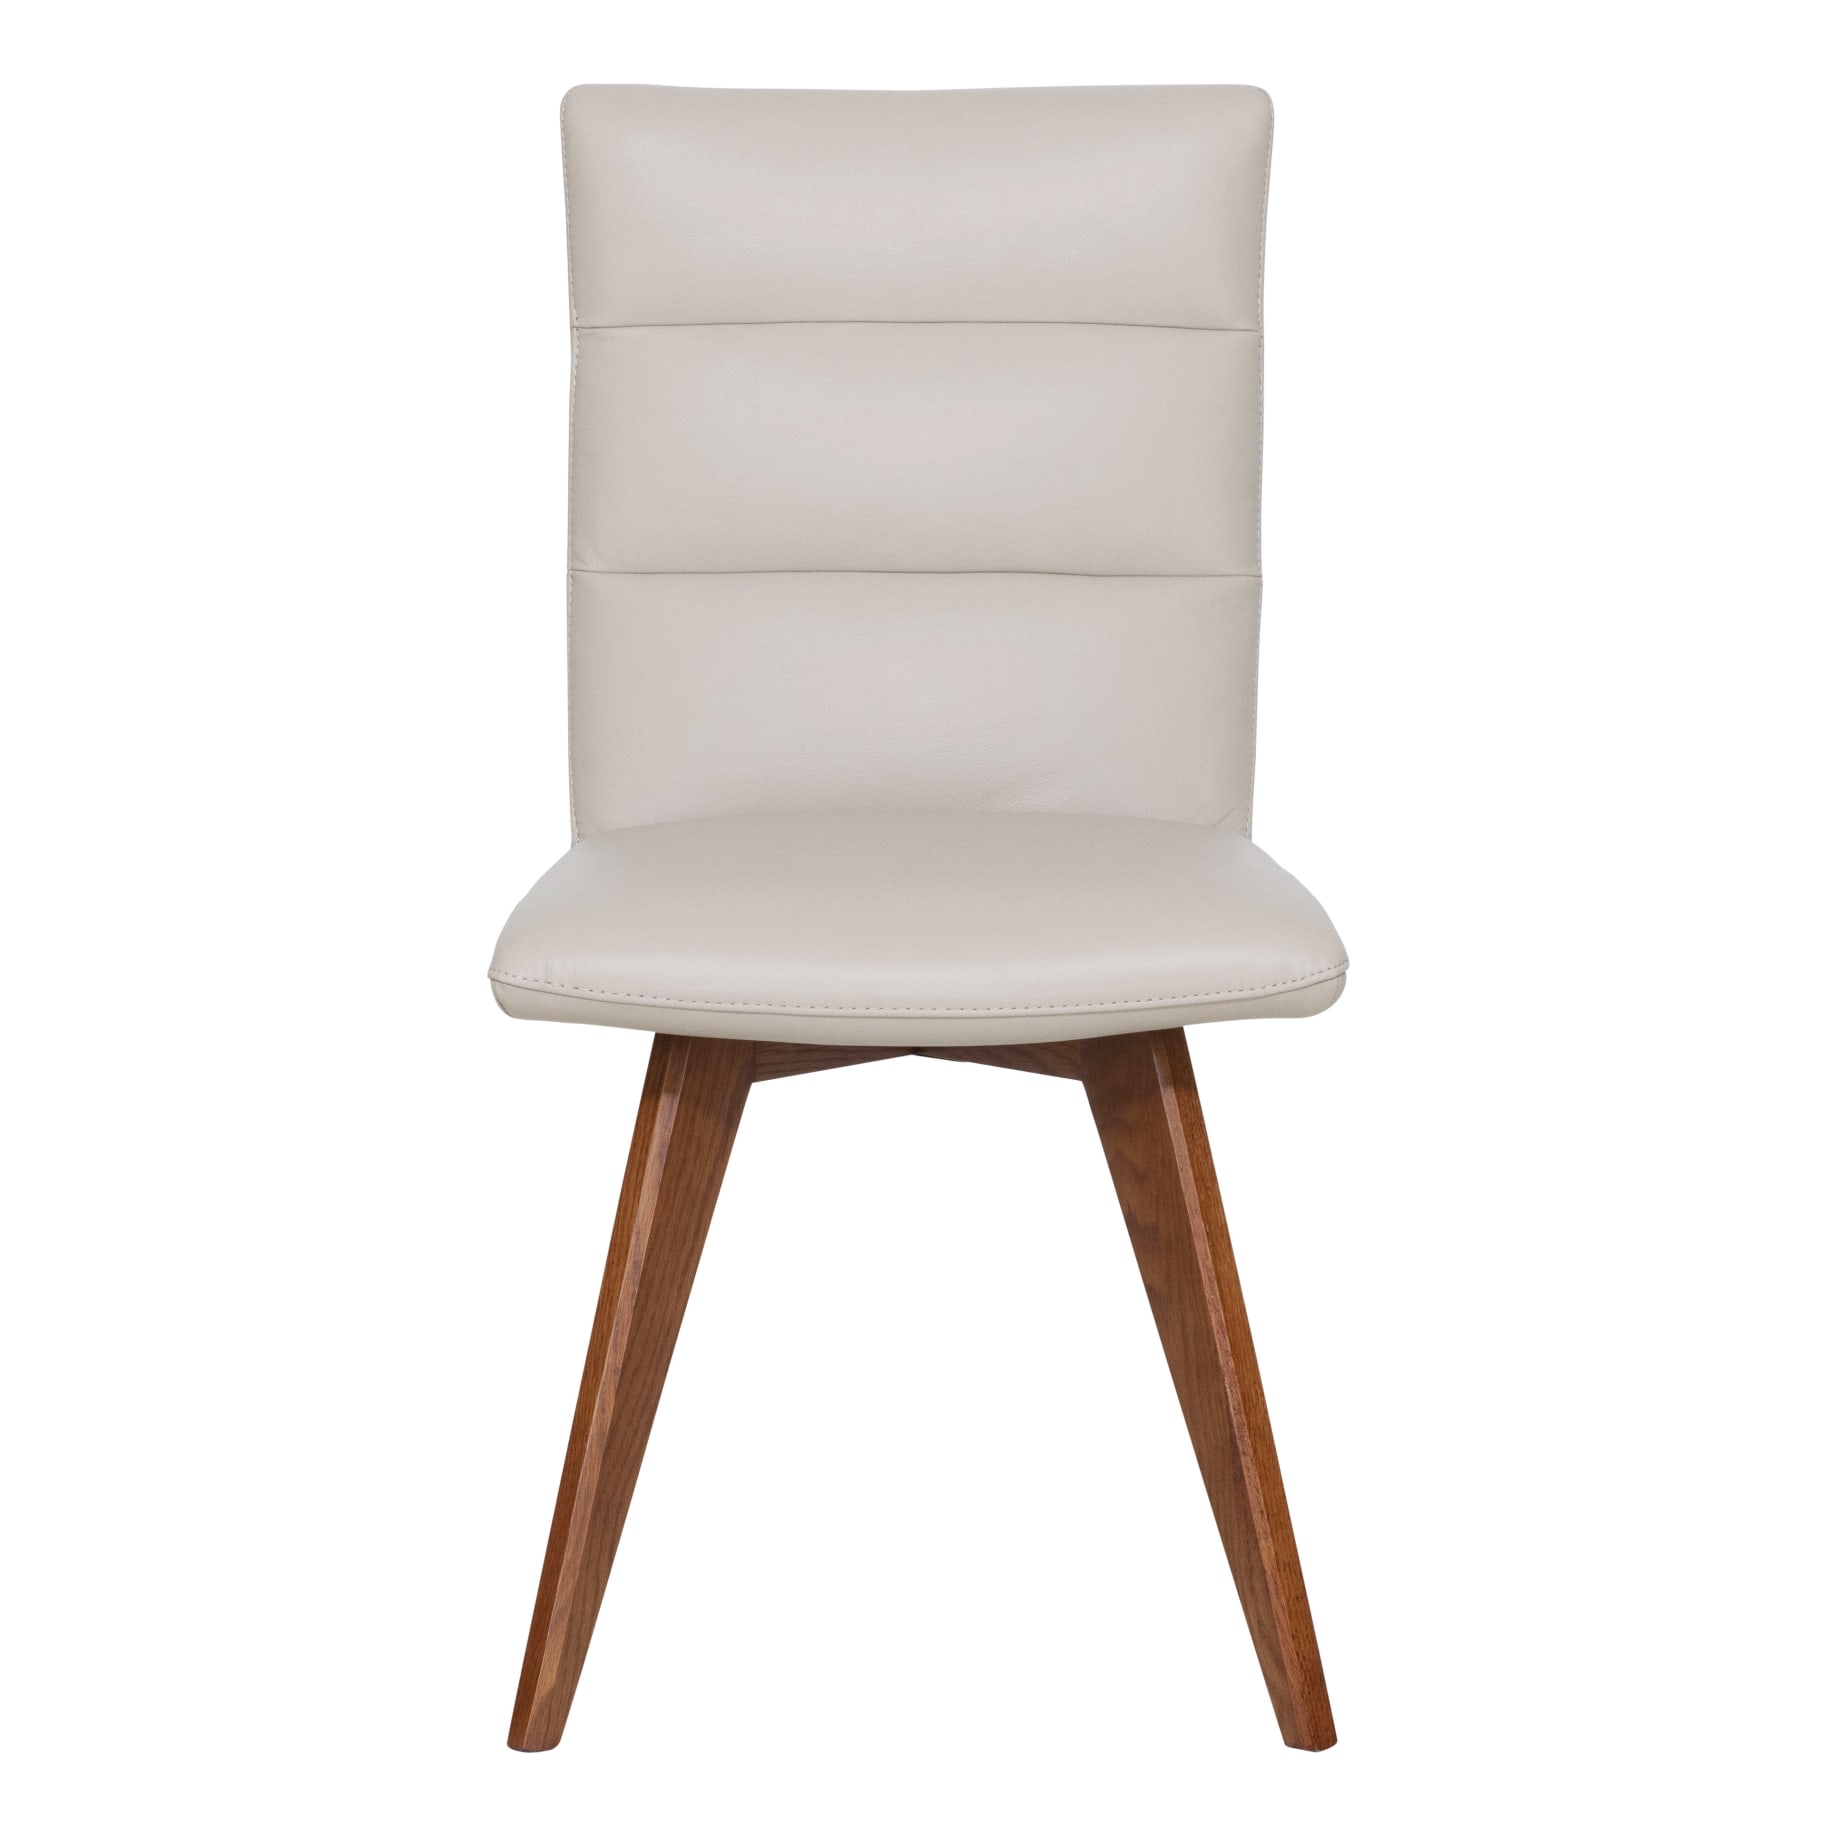 Hudson Dining Chair in Mocha /Blackwood Stain